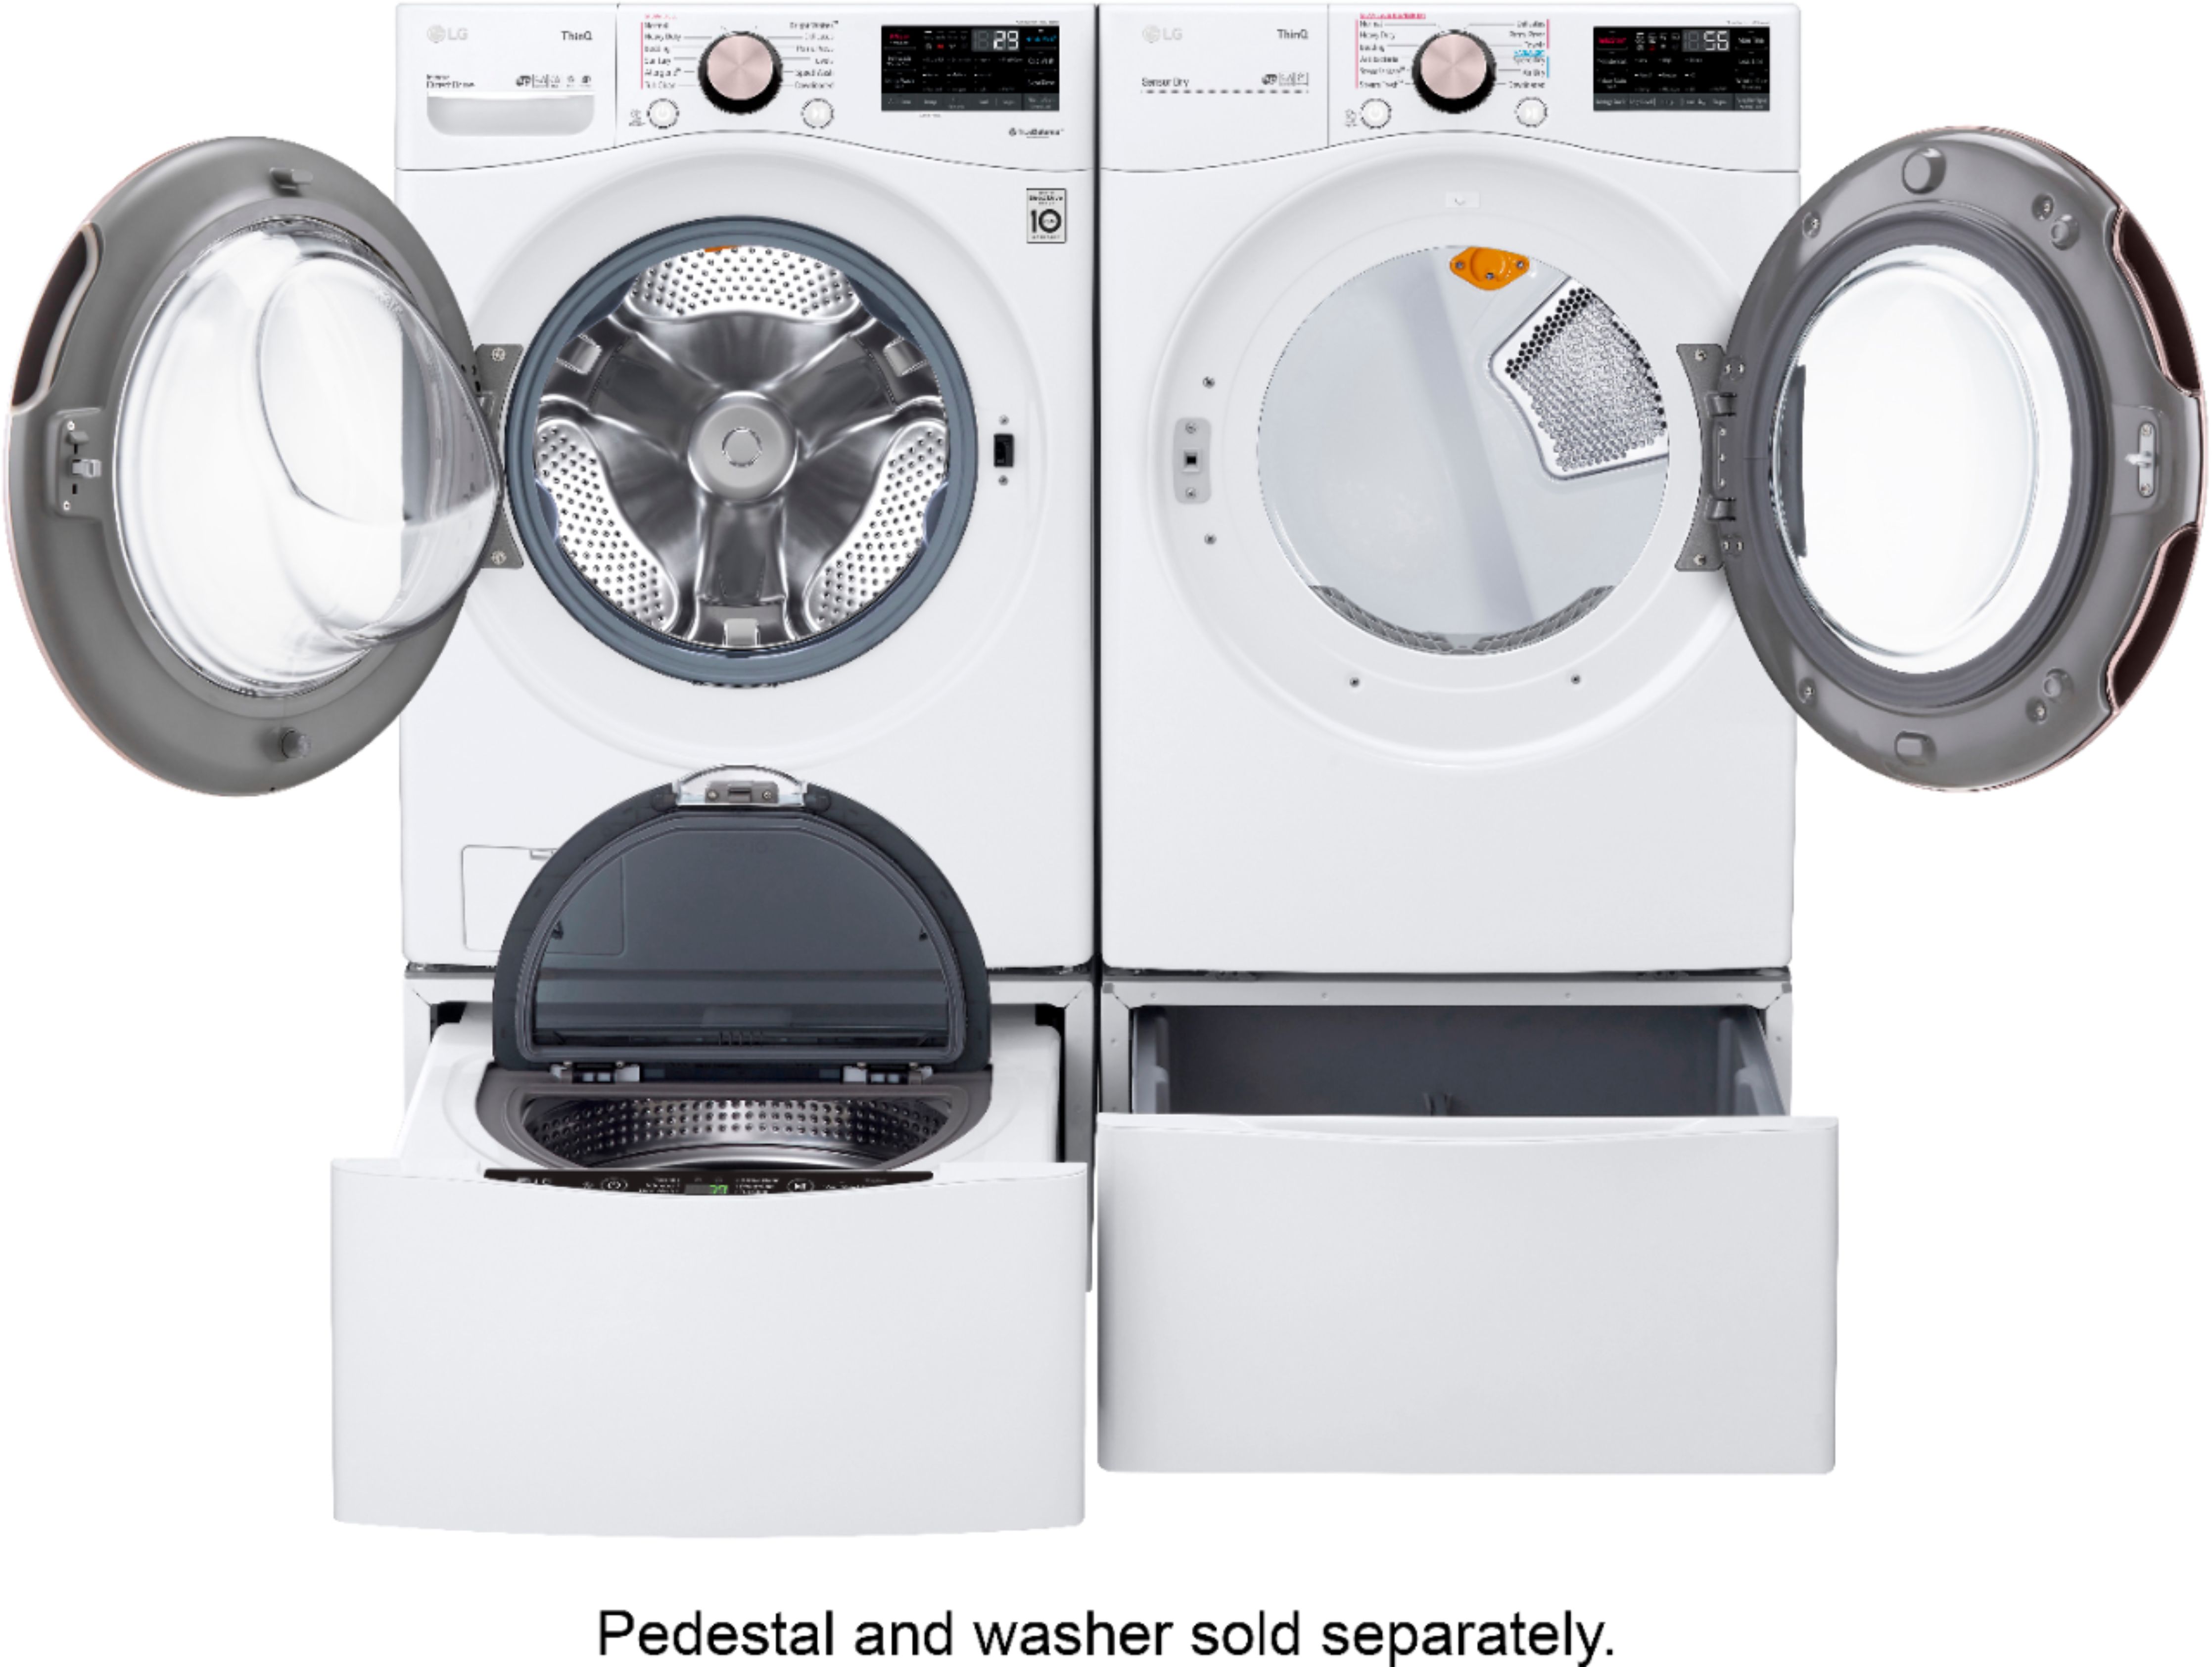 DLGX4001W LG 27 7.4 cu.ft. Ultra Large Capacity Gas Dryer with